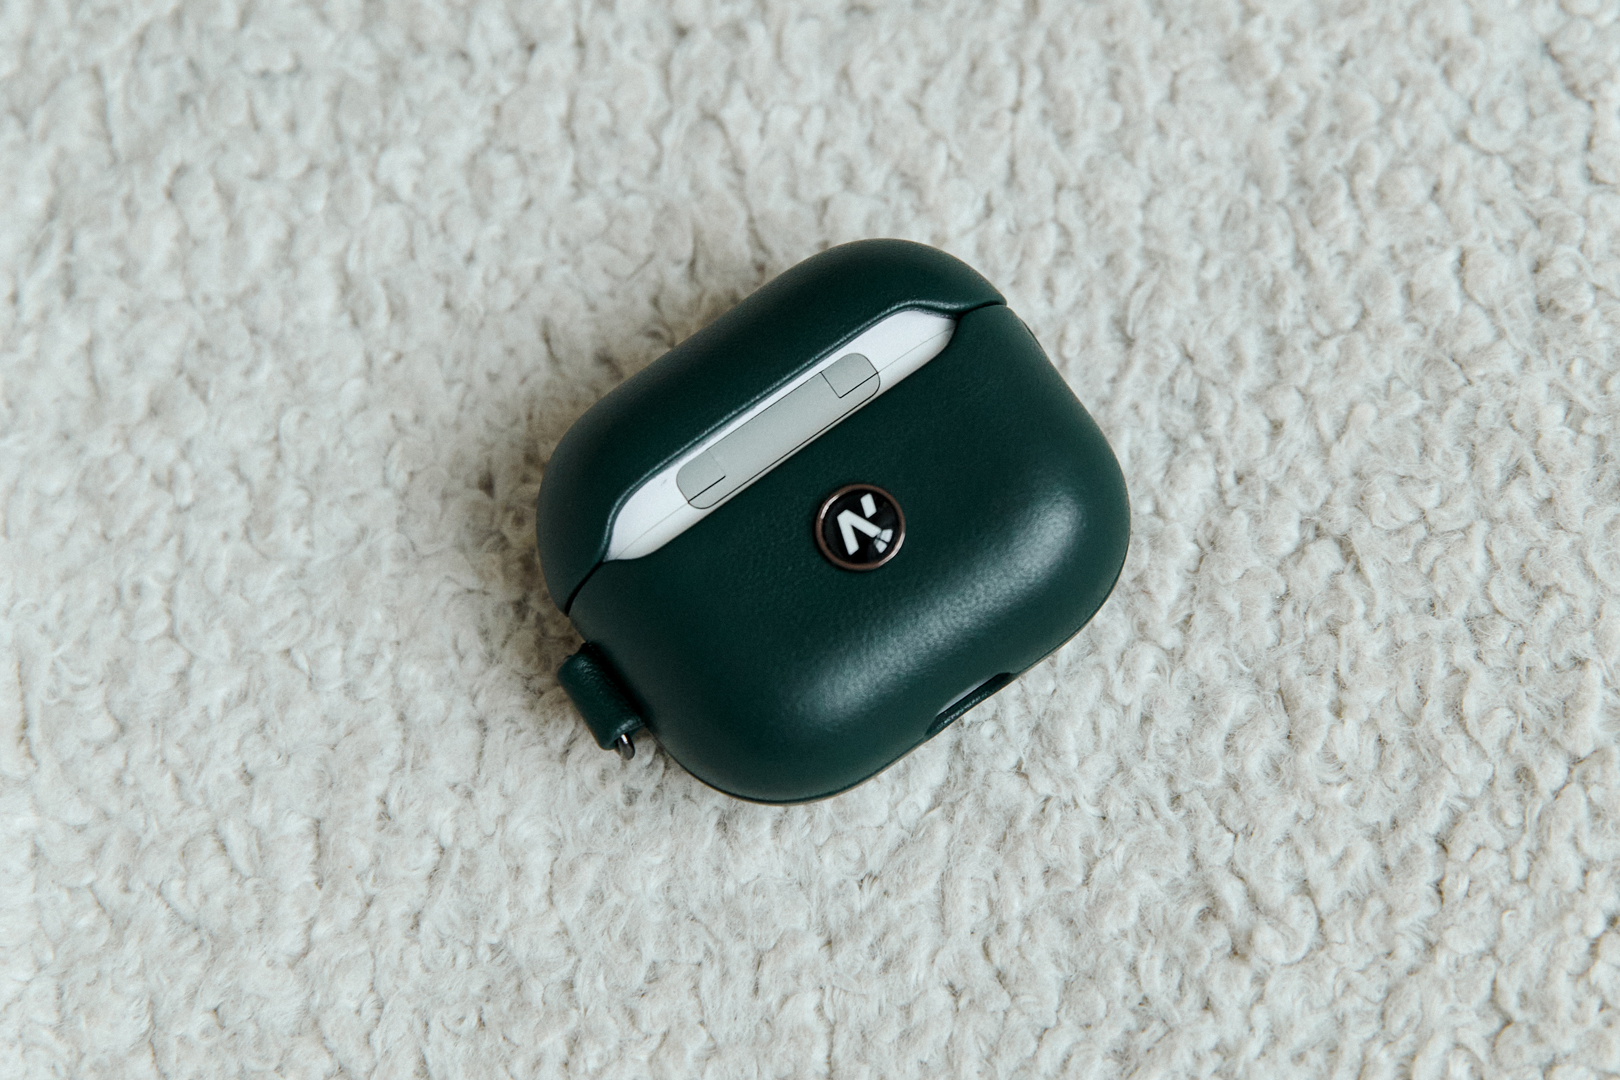 green AirPods case